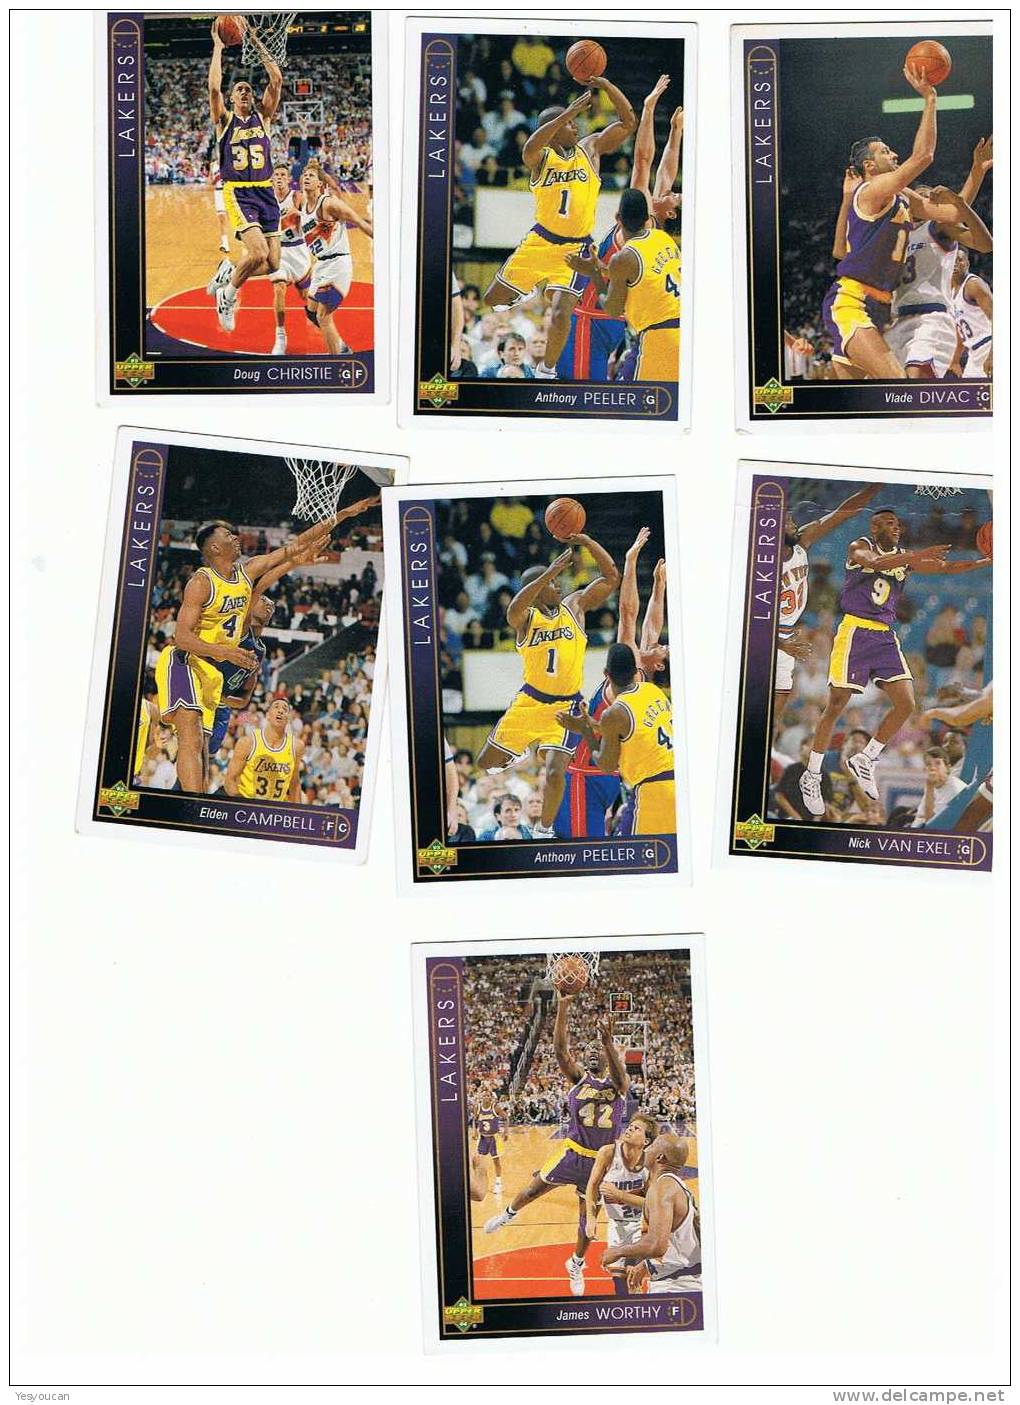 1992-93 Upper Deck Basketball Cards (LAKERS 7) - Lotti